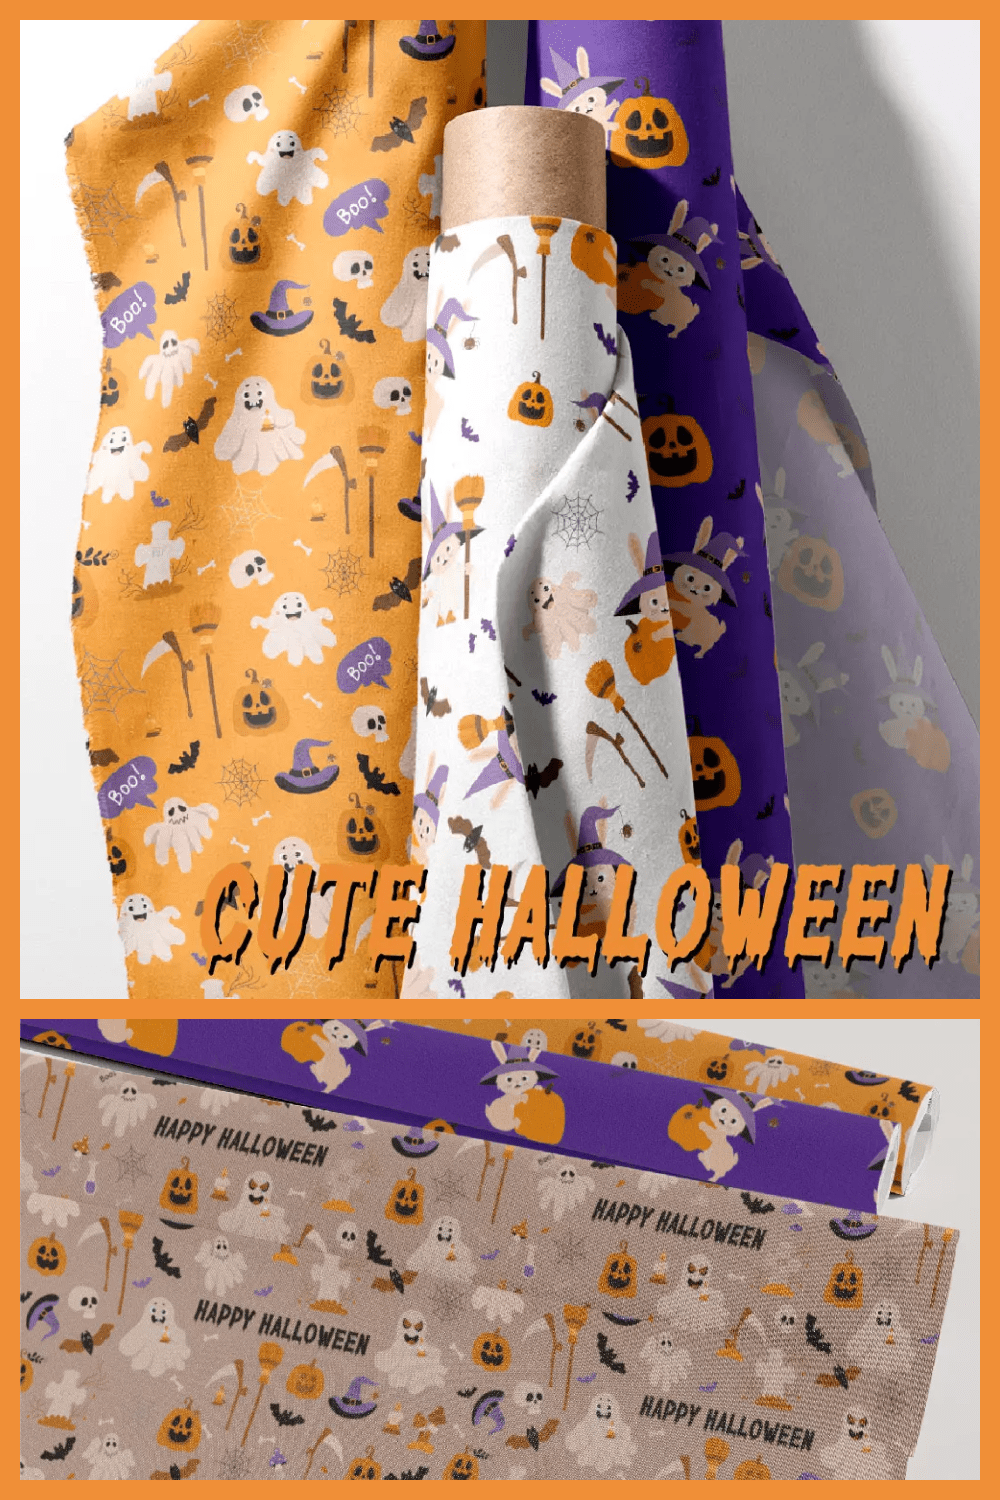 Images of wrapping paper on the theme of Halloween.